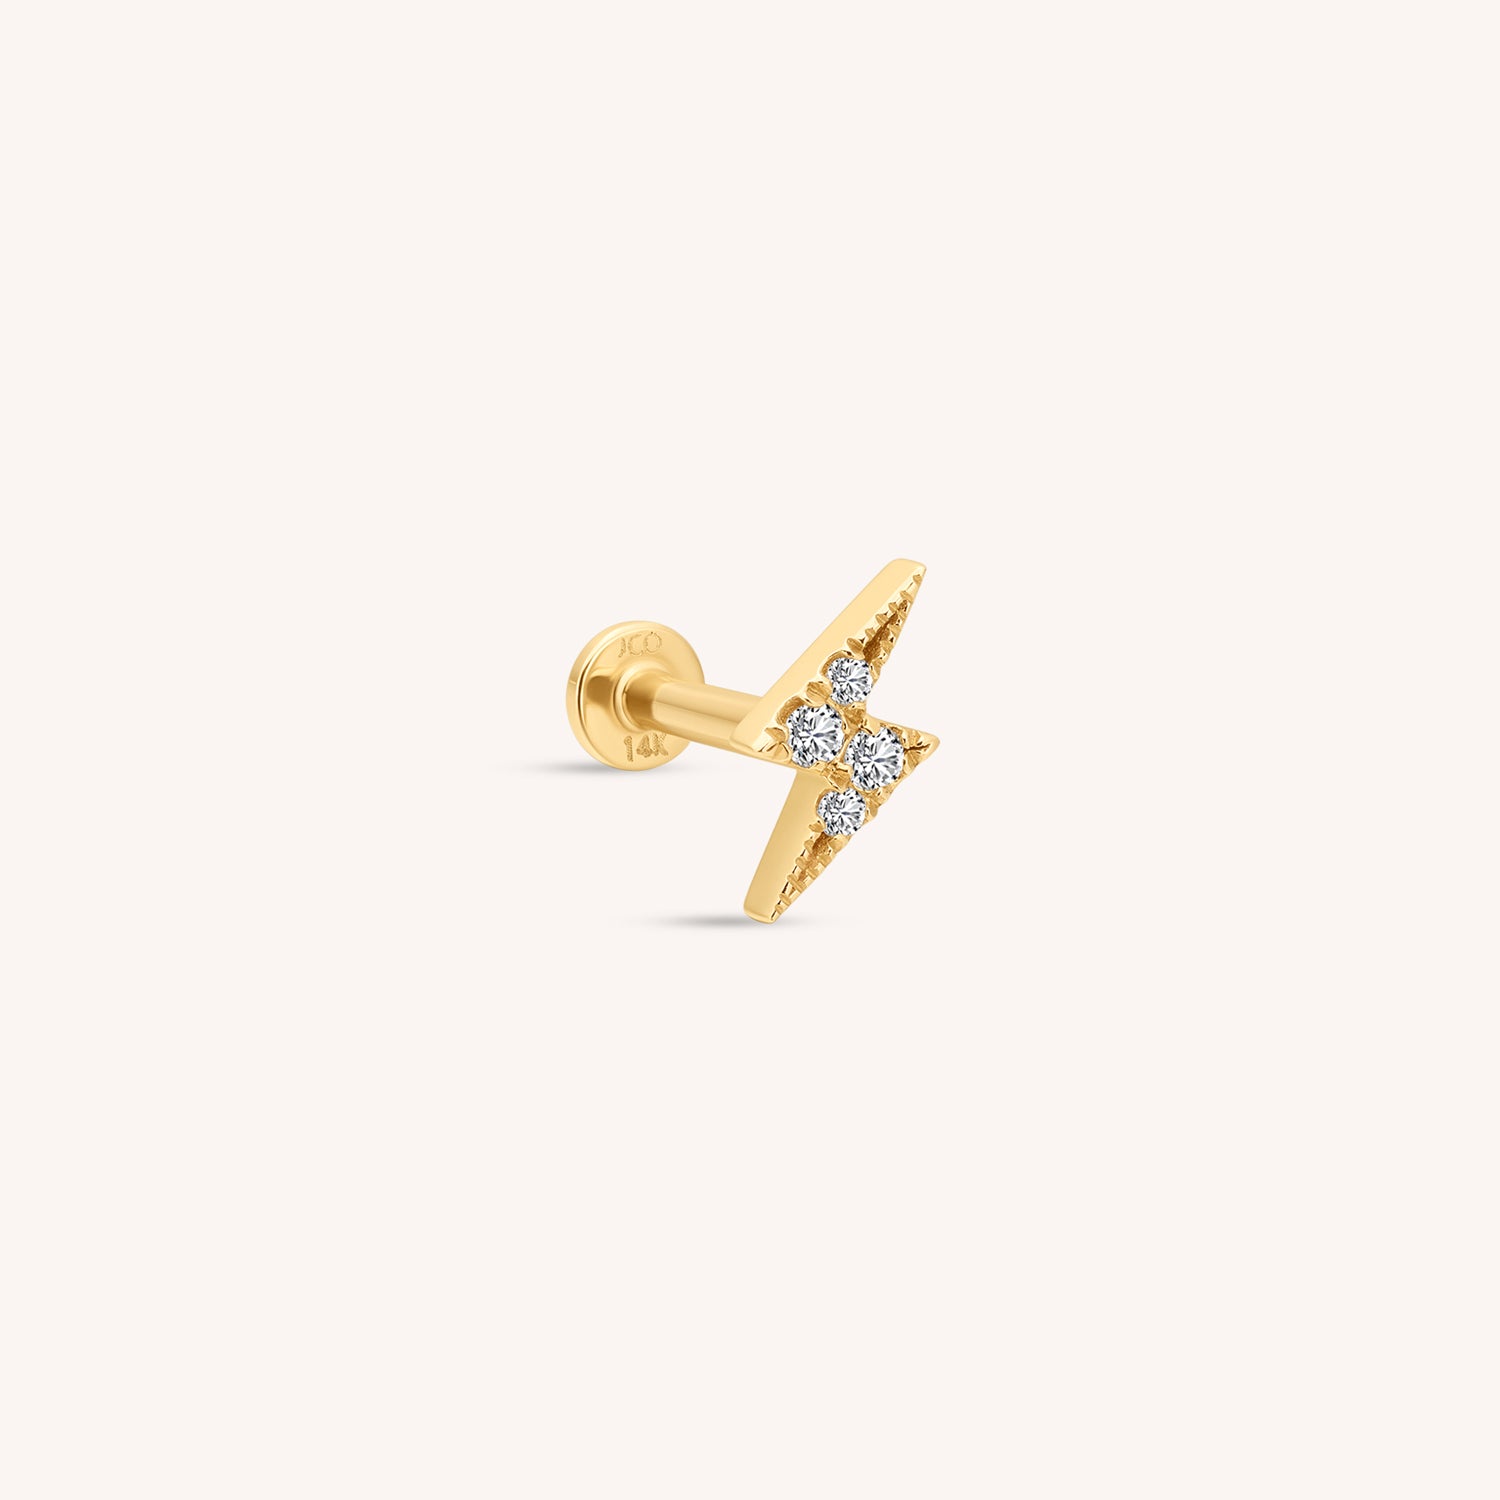 KIKICHIC | Minimalist Jewelry | NYC | Ball Screw Flat Back Tiny CZ Star Stud  Earrings Cartilage, Tragus, Helix, Conch in Sterling Silver in 14k Gold and  Silver.